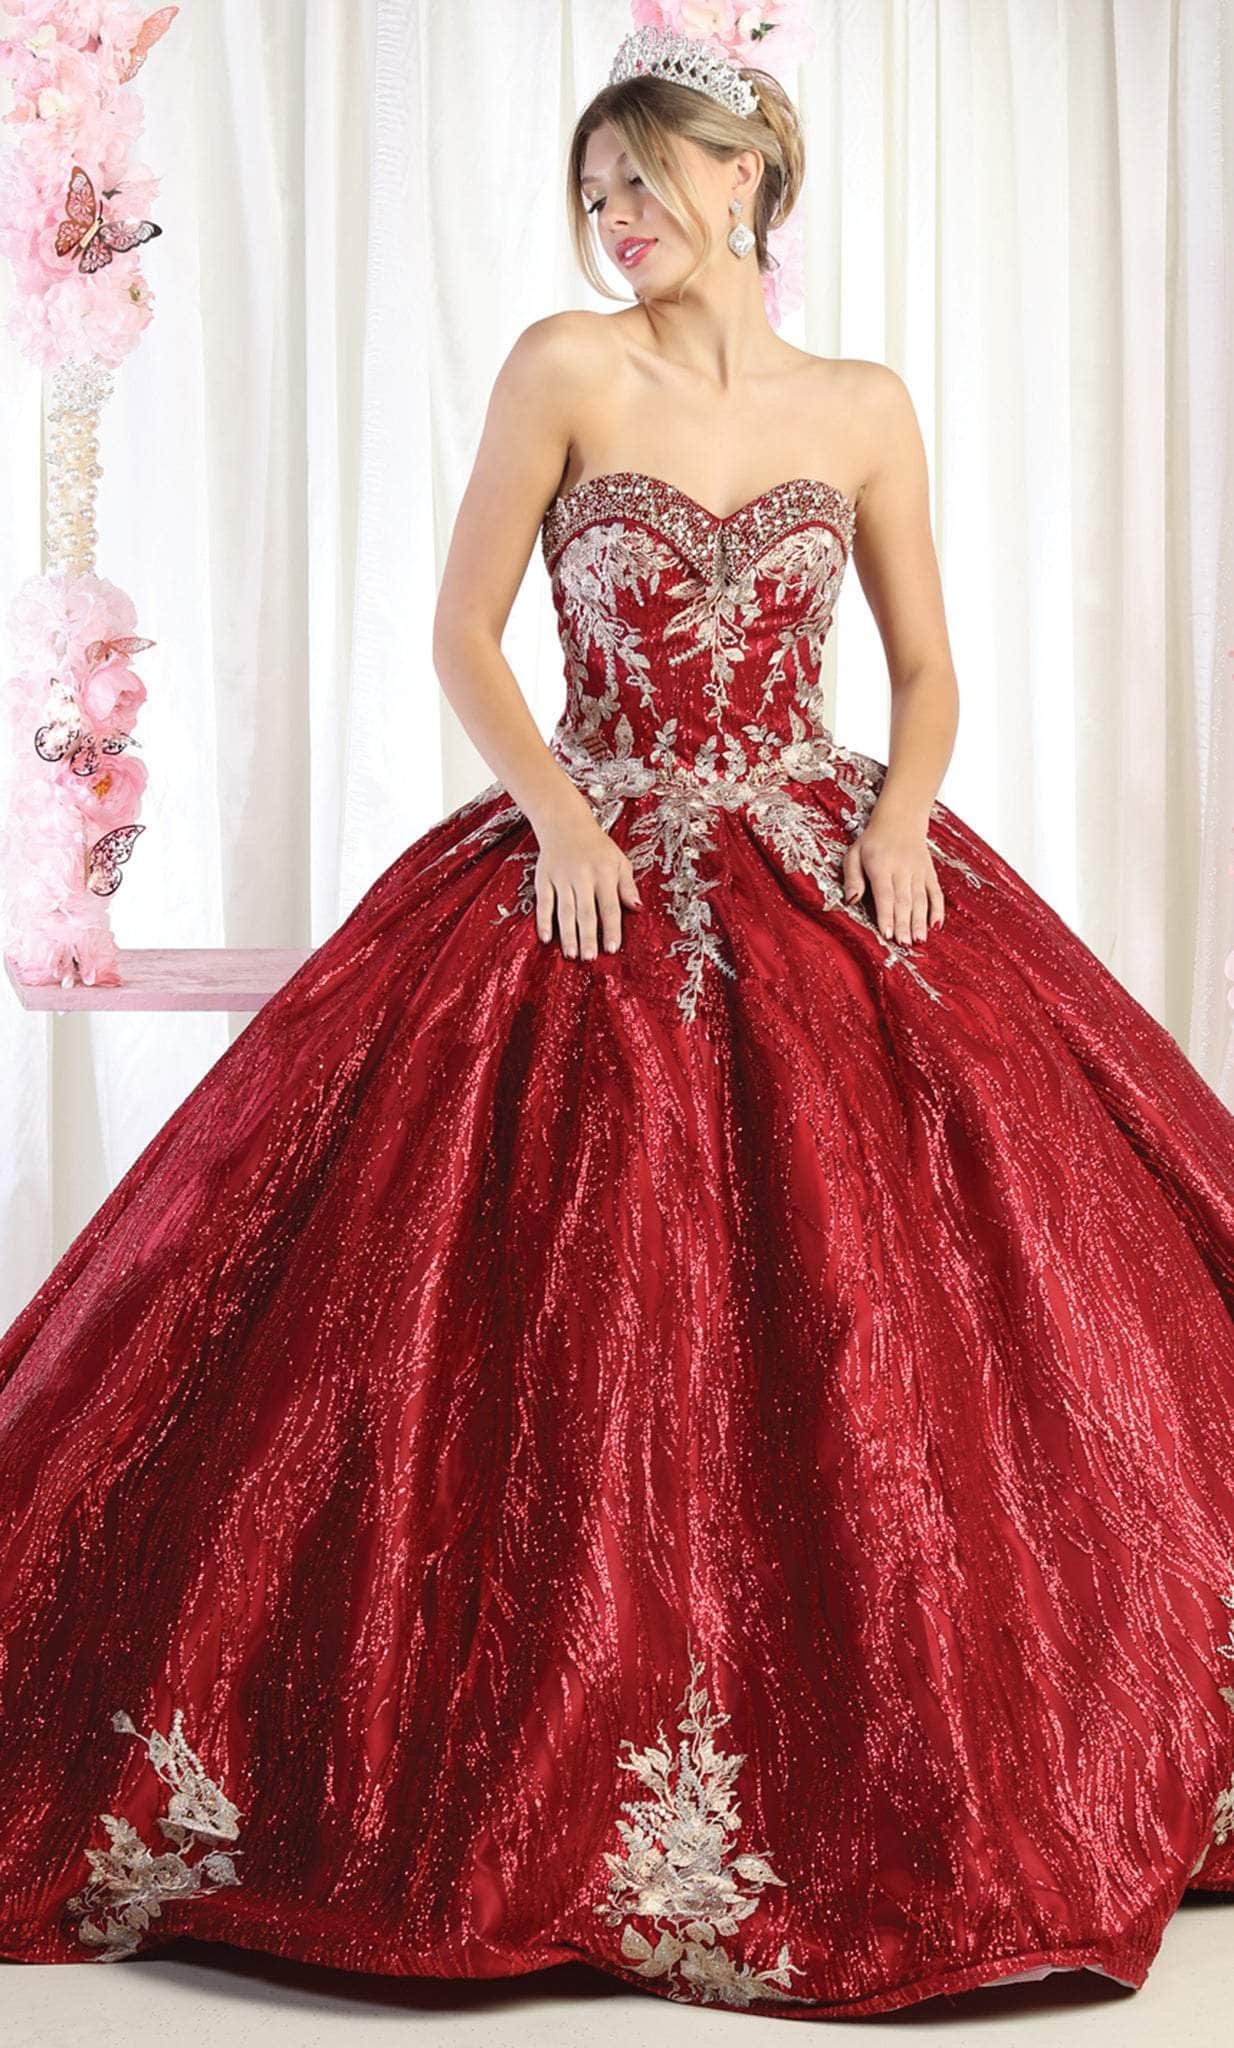 Image of May Queen LK179 - Embroidered Quinceanera Ballgown